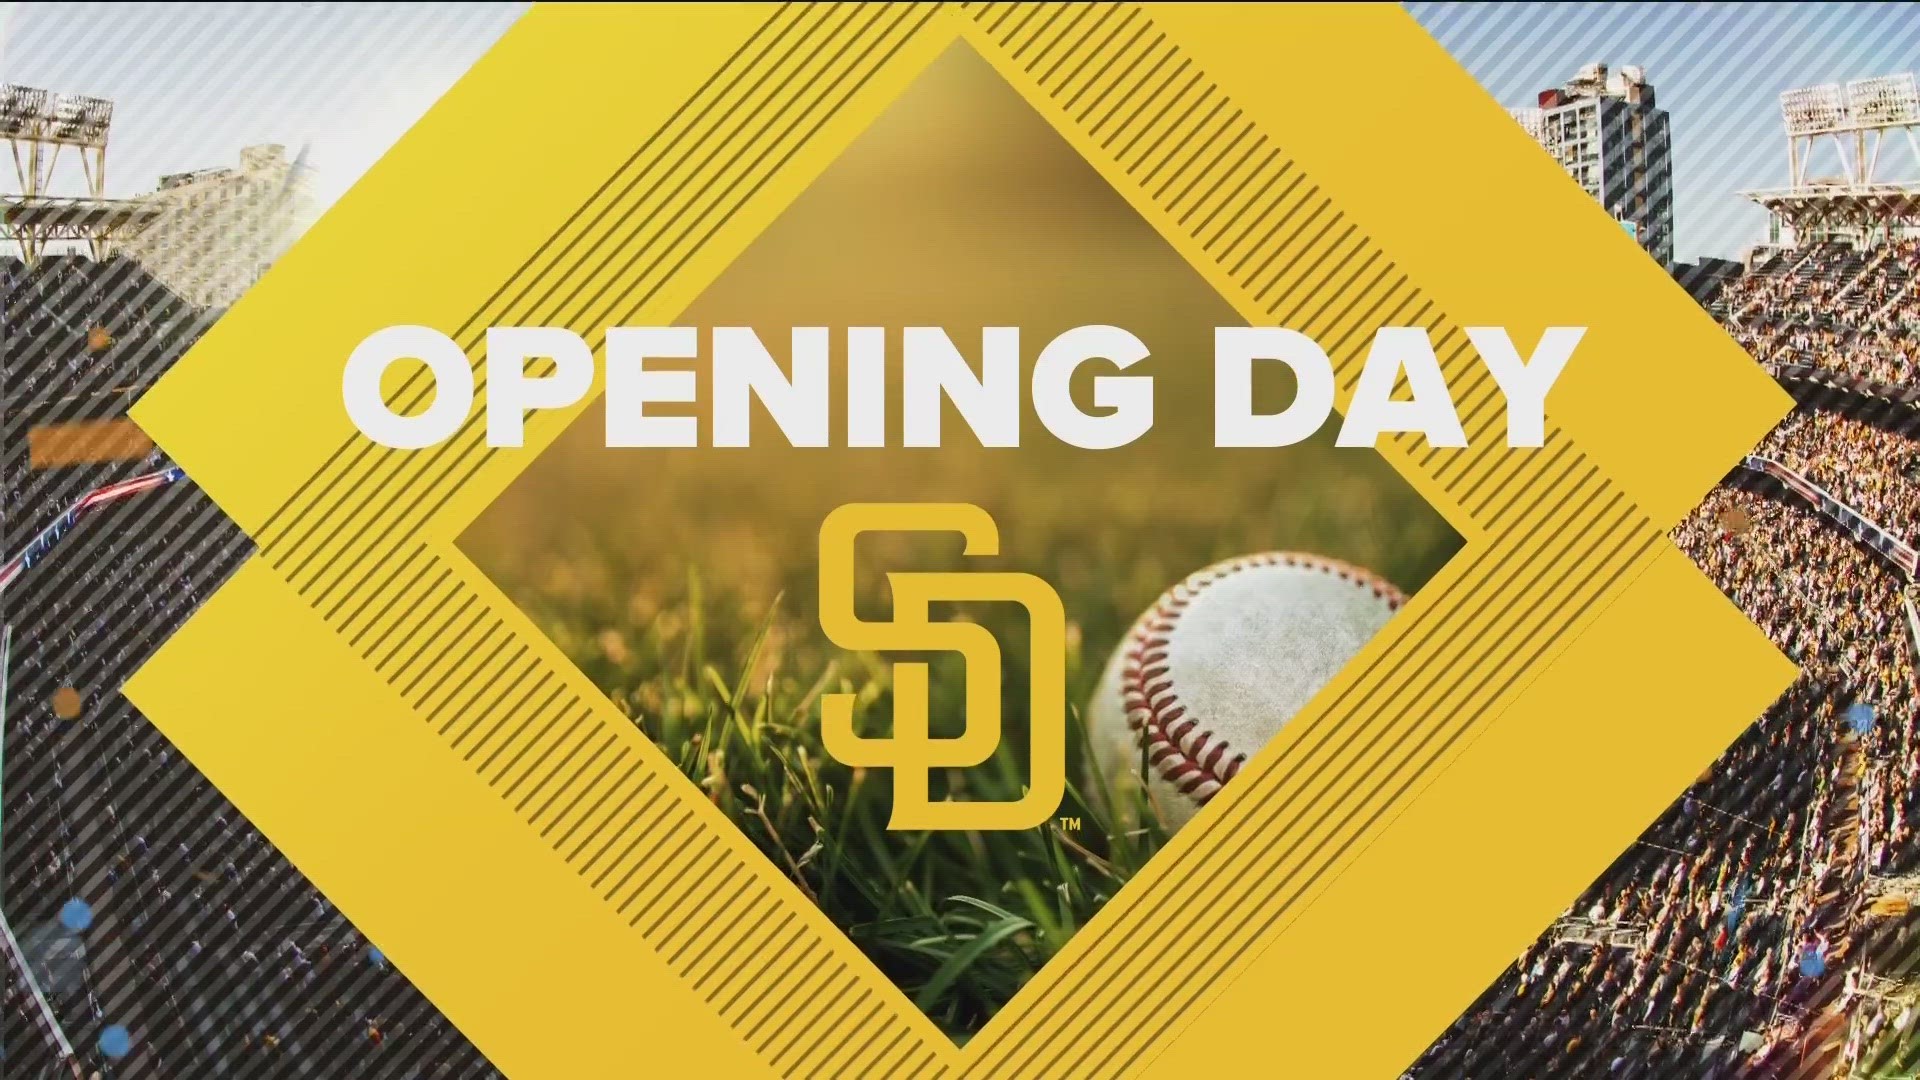 “Probably the most highly anticipated Opening Day I think in maybe the history of the franchise,” said television announcer Mark Grant.